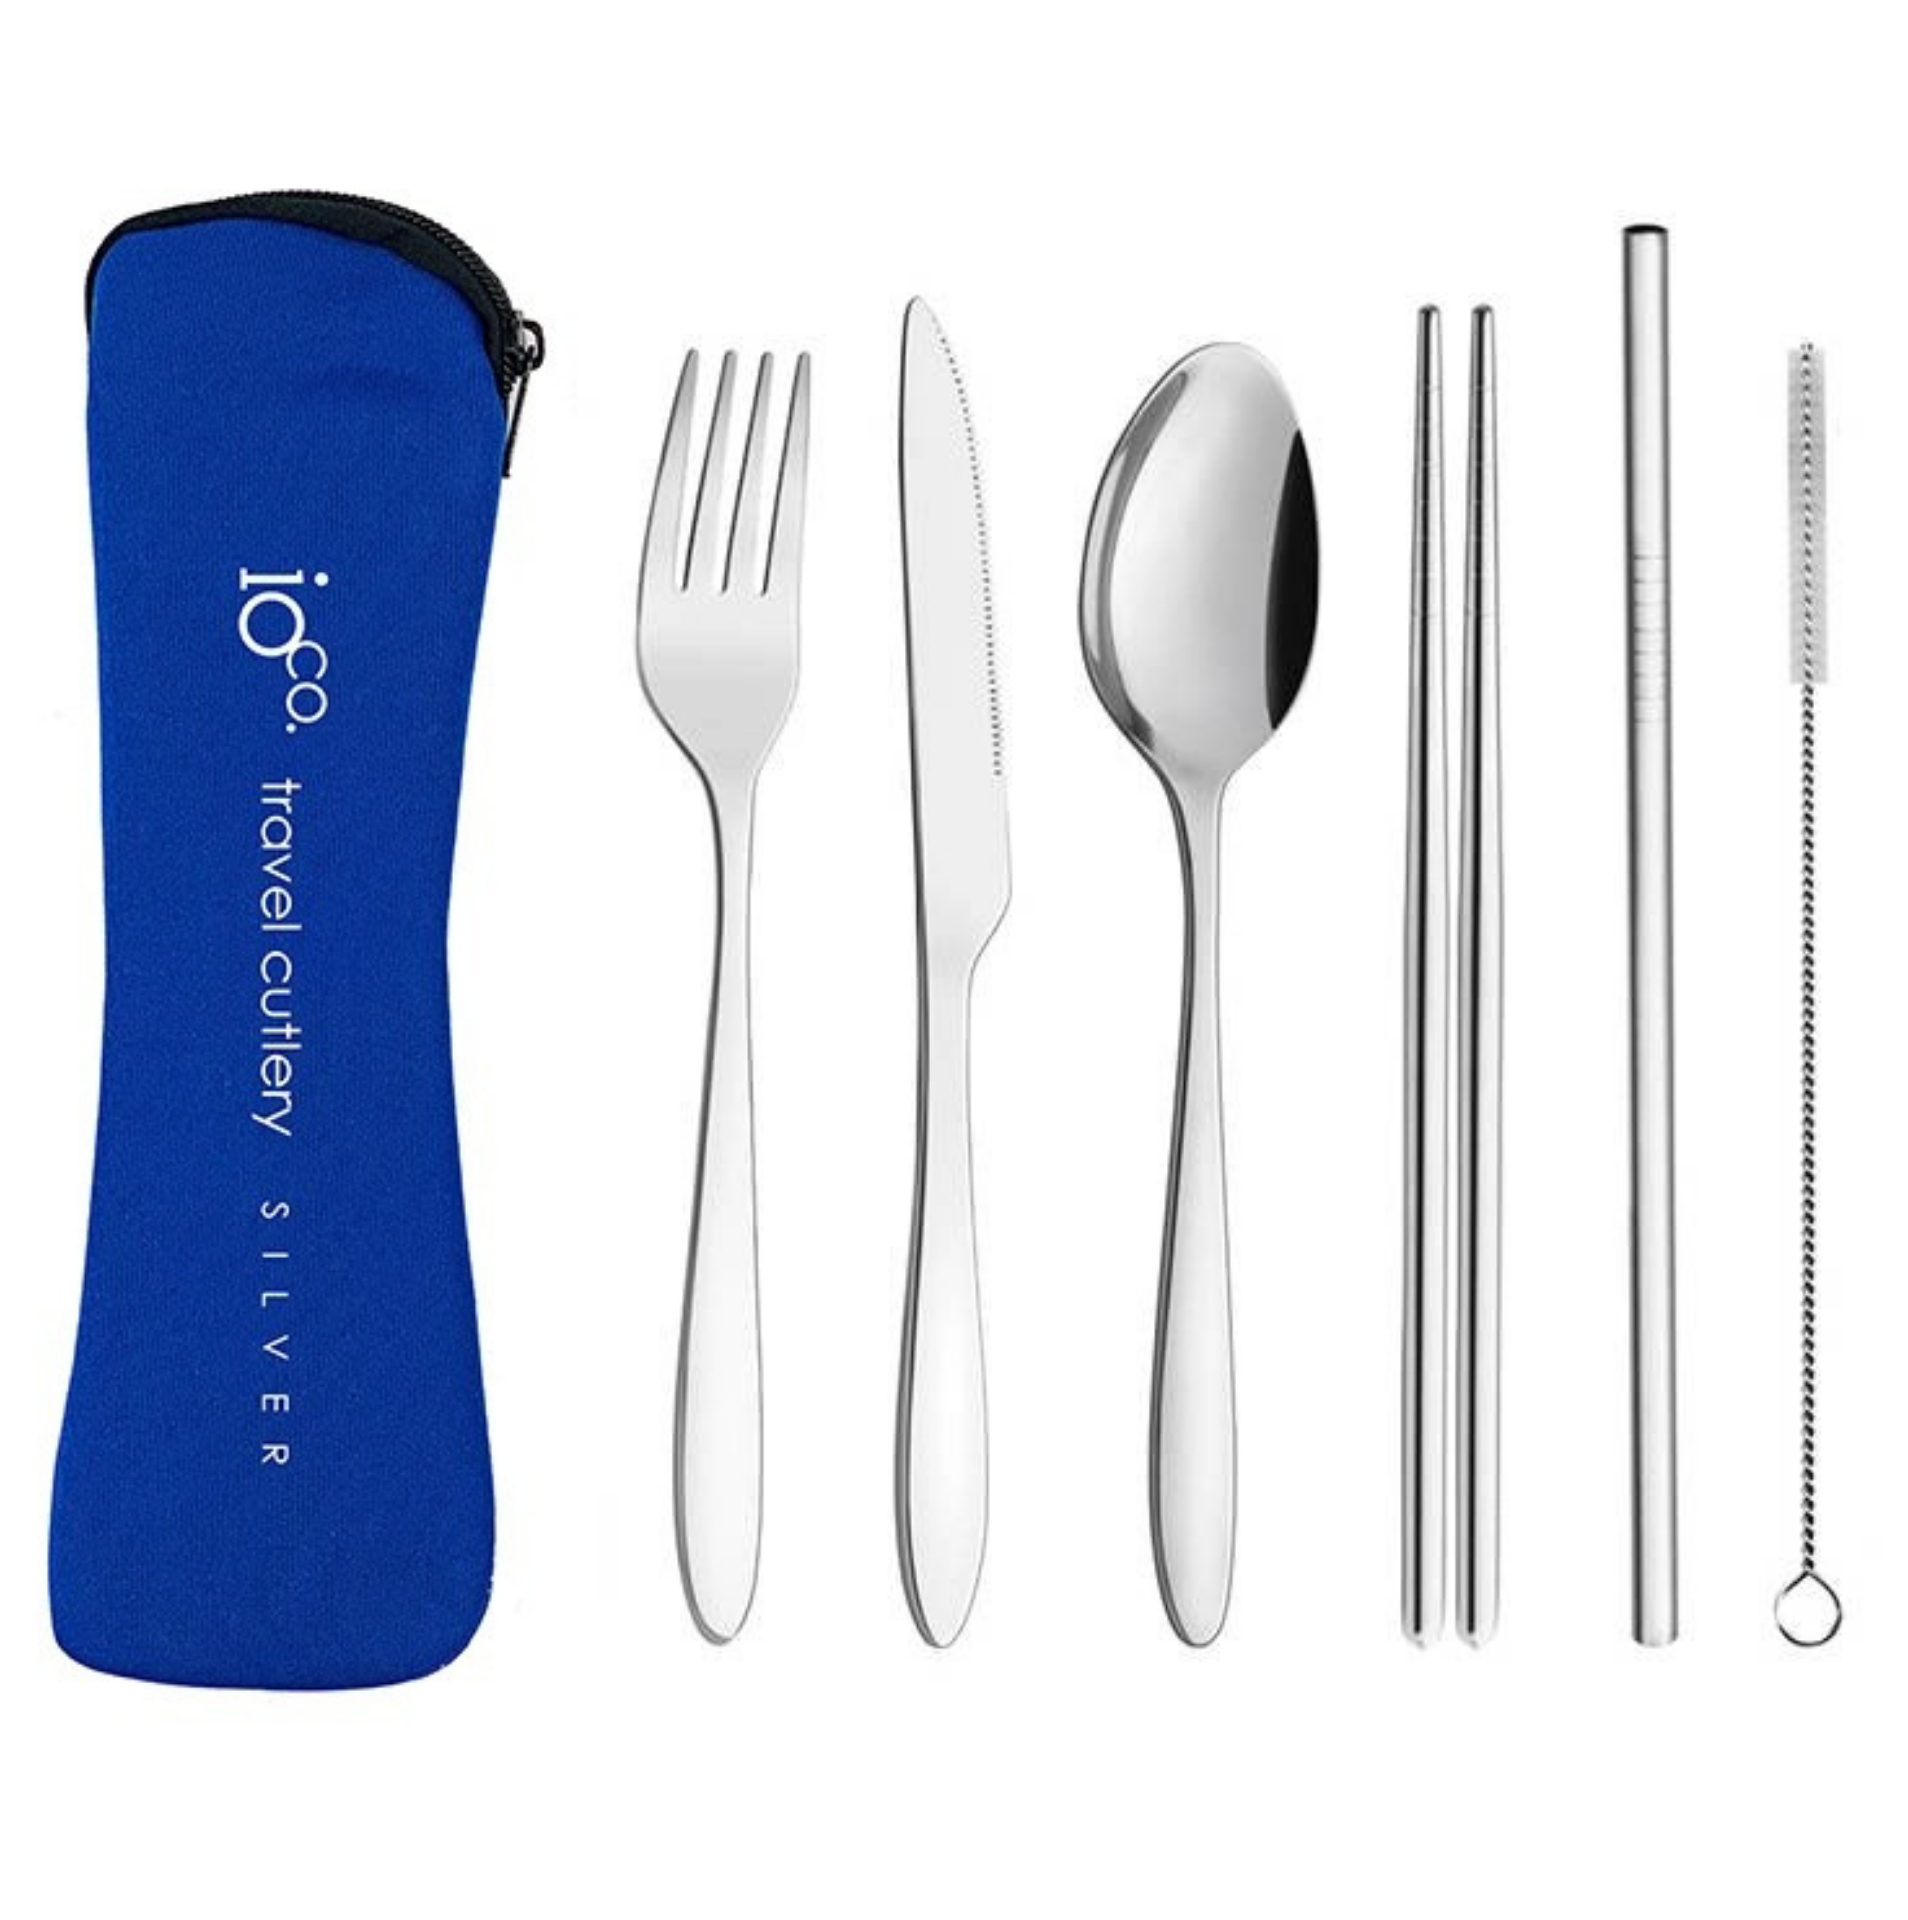 Navy Travel Cutlery - Stainless Steel